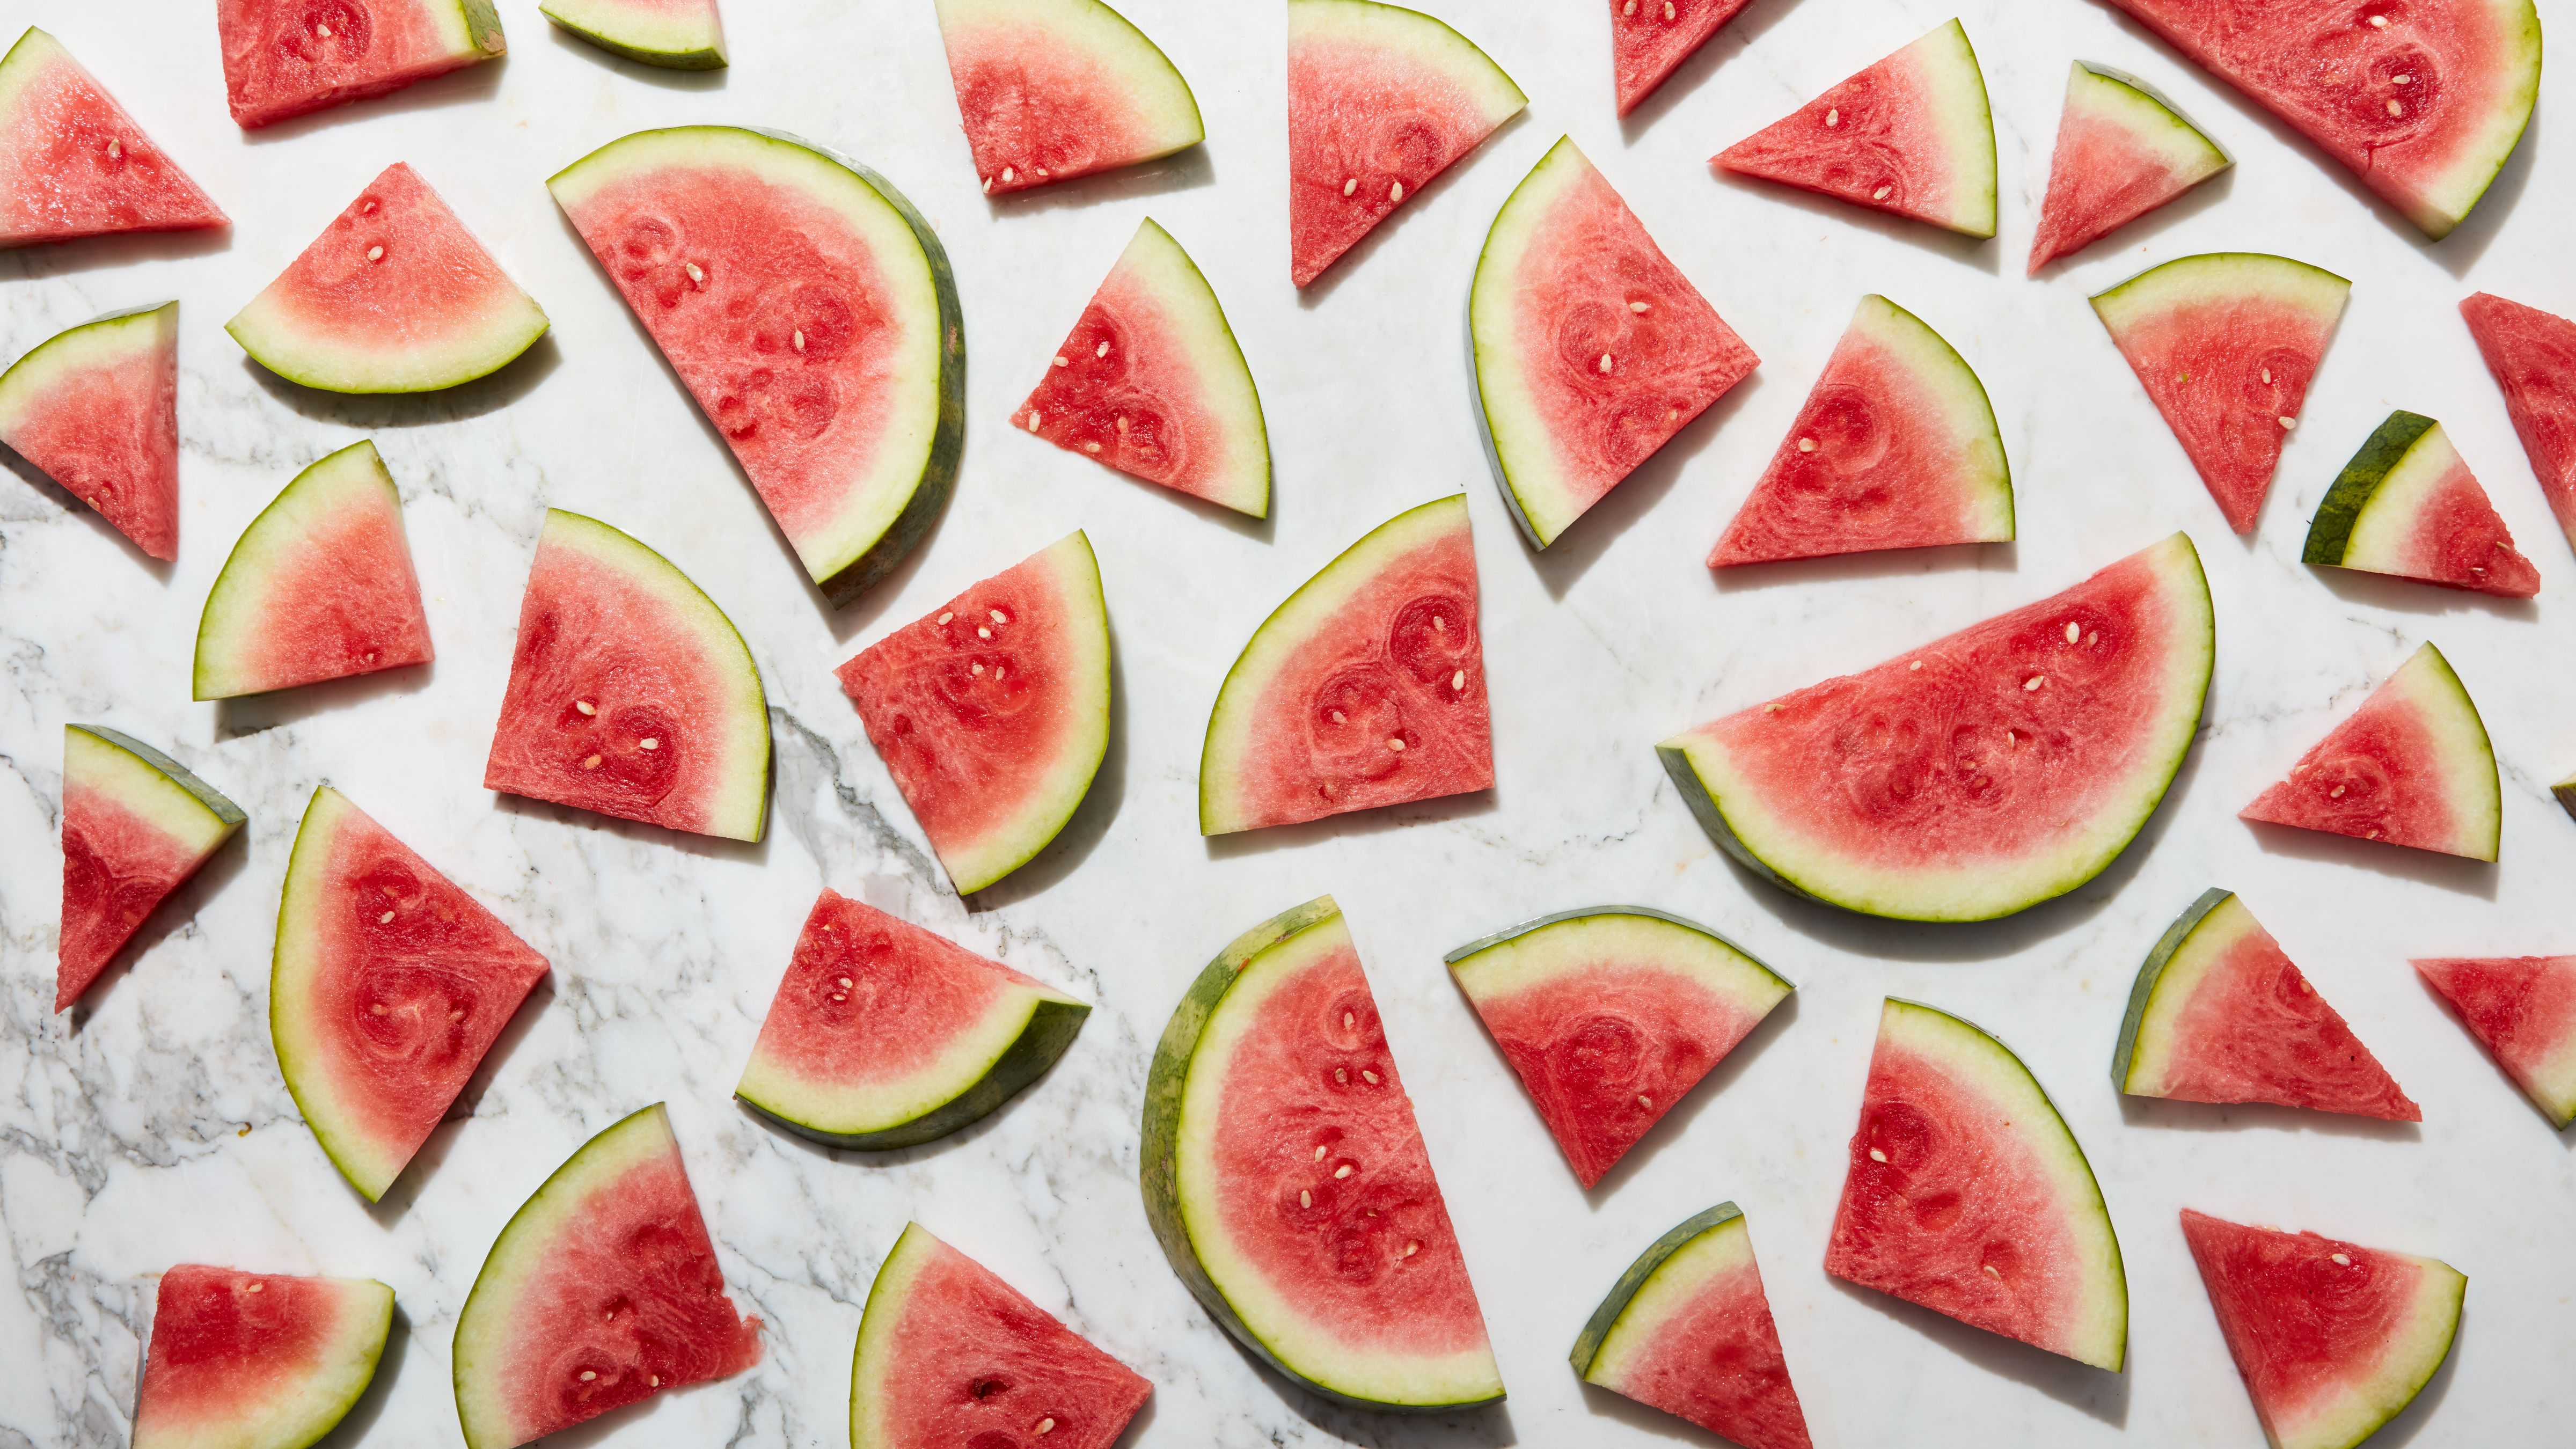 Perk Up Your Phone With This Watermelon Wallpaper! + Main